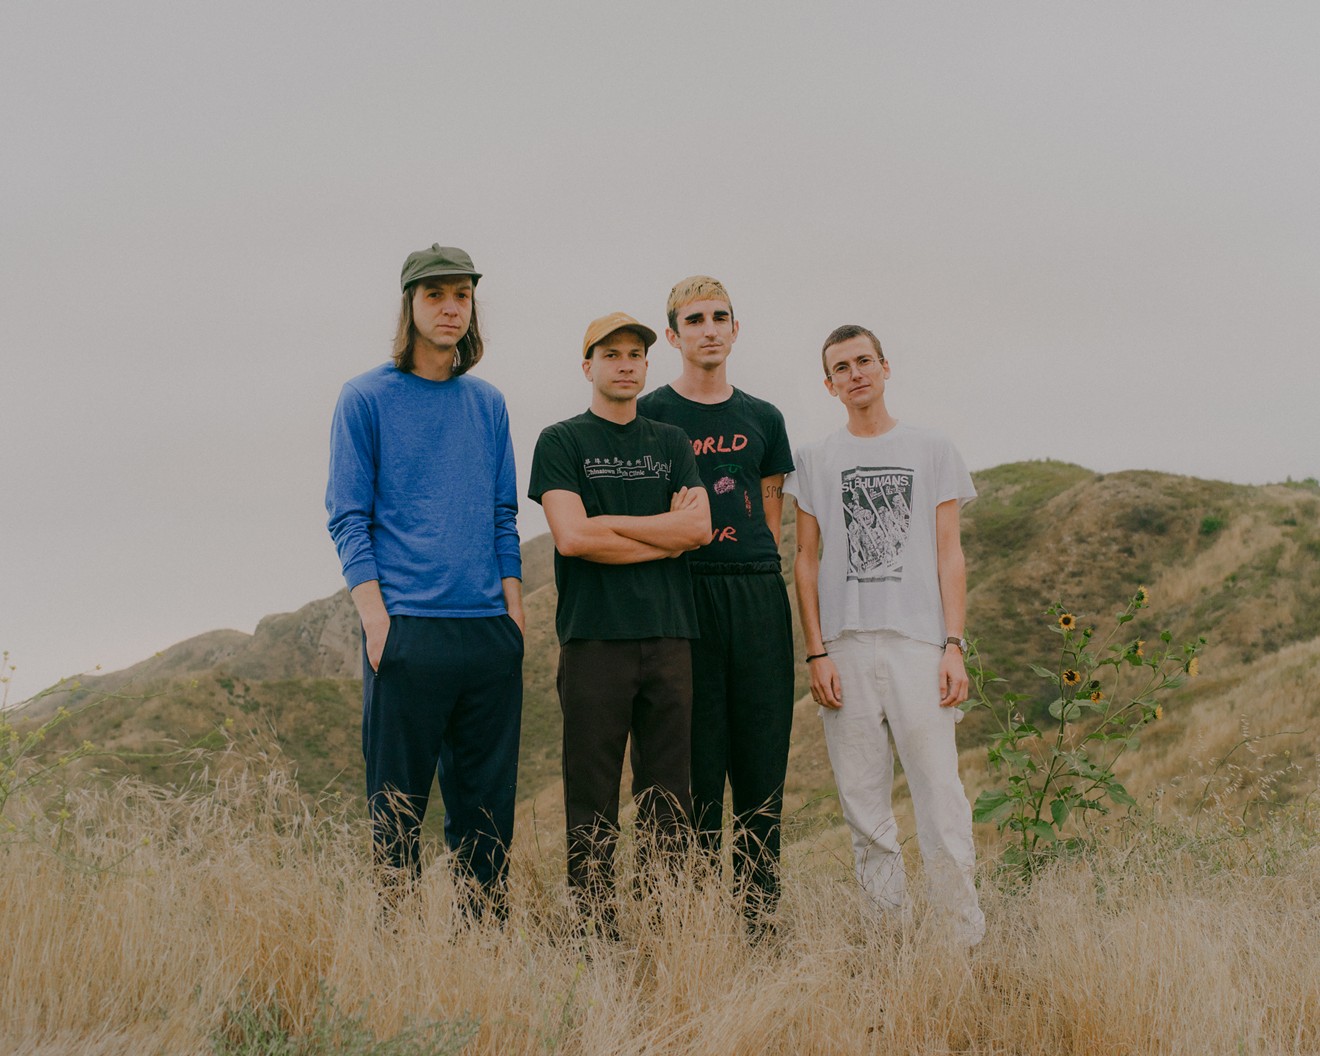 DIIV come to The Rebel Lounge this Saturday, October 12.